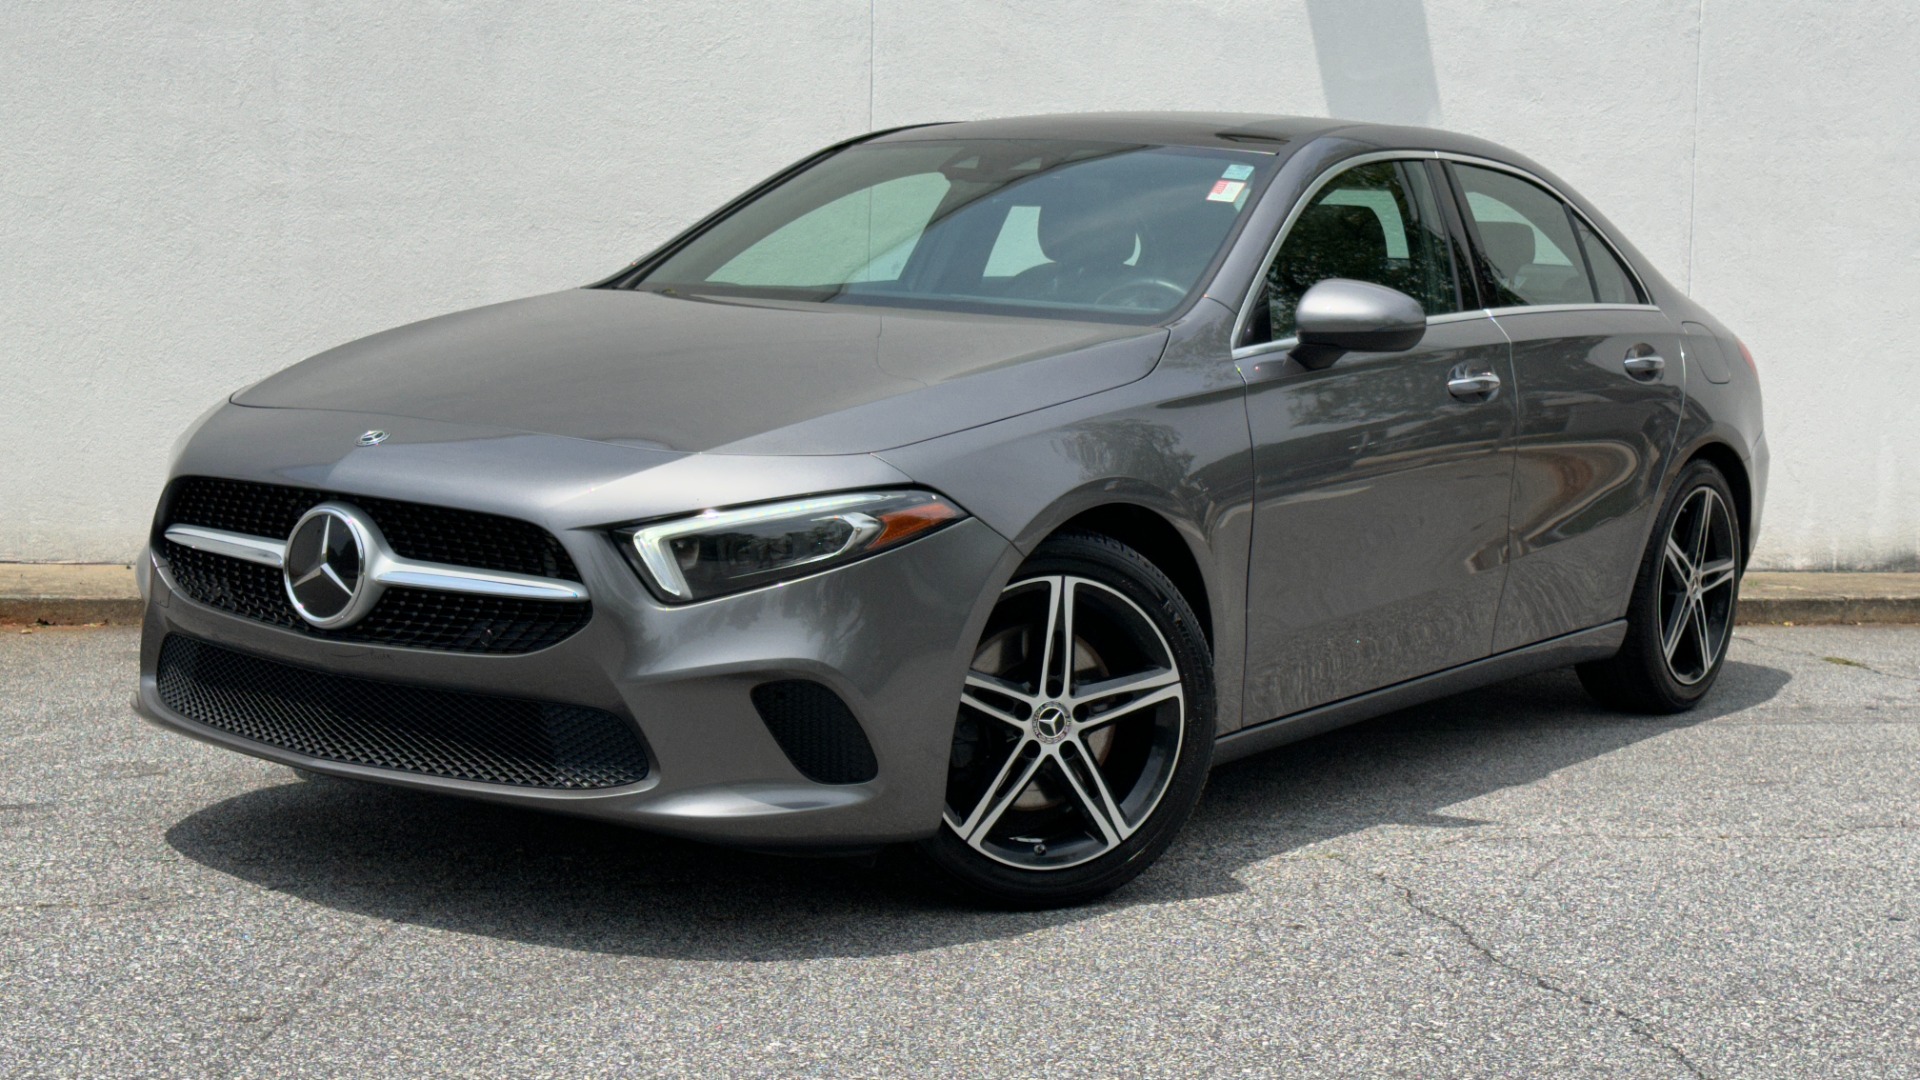 Used 2019 Mercedes-Benz A-Class A220 / AMBIENT LIGHTING / PREMIUM PACKAGE / DRIVER ASSIST for sale $27,000 at Formula Imports in Charlotte NC 28227 1